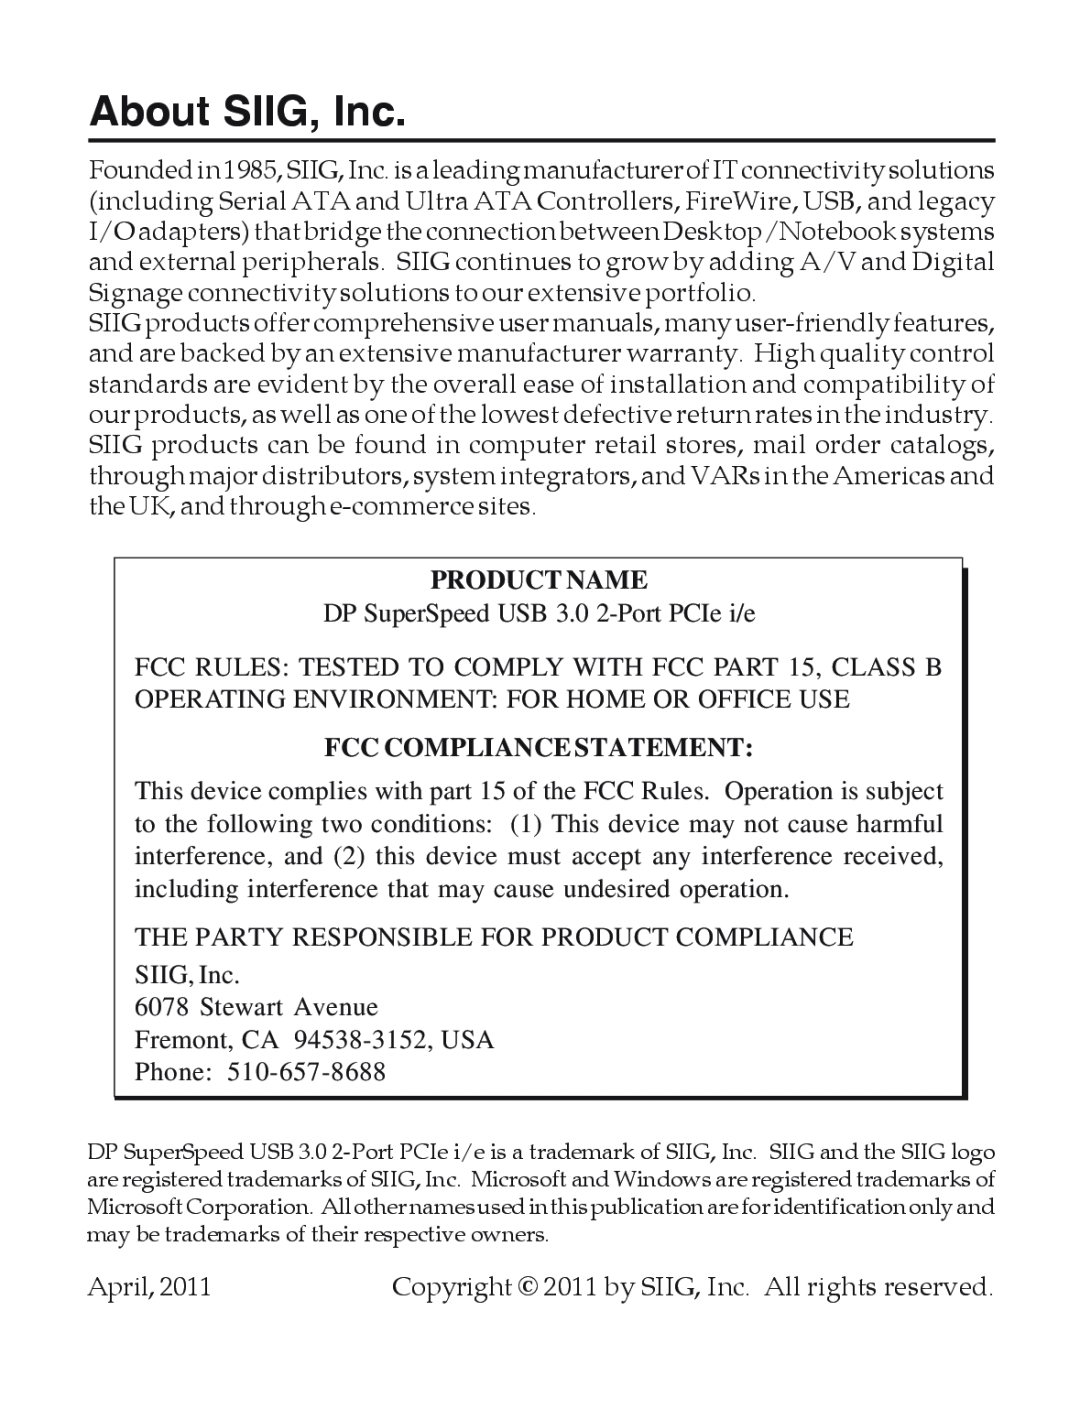 SIIG EX2101 manual About SIIG, Inc, Product Name, Fcc Compliance Statement 